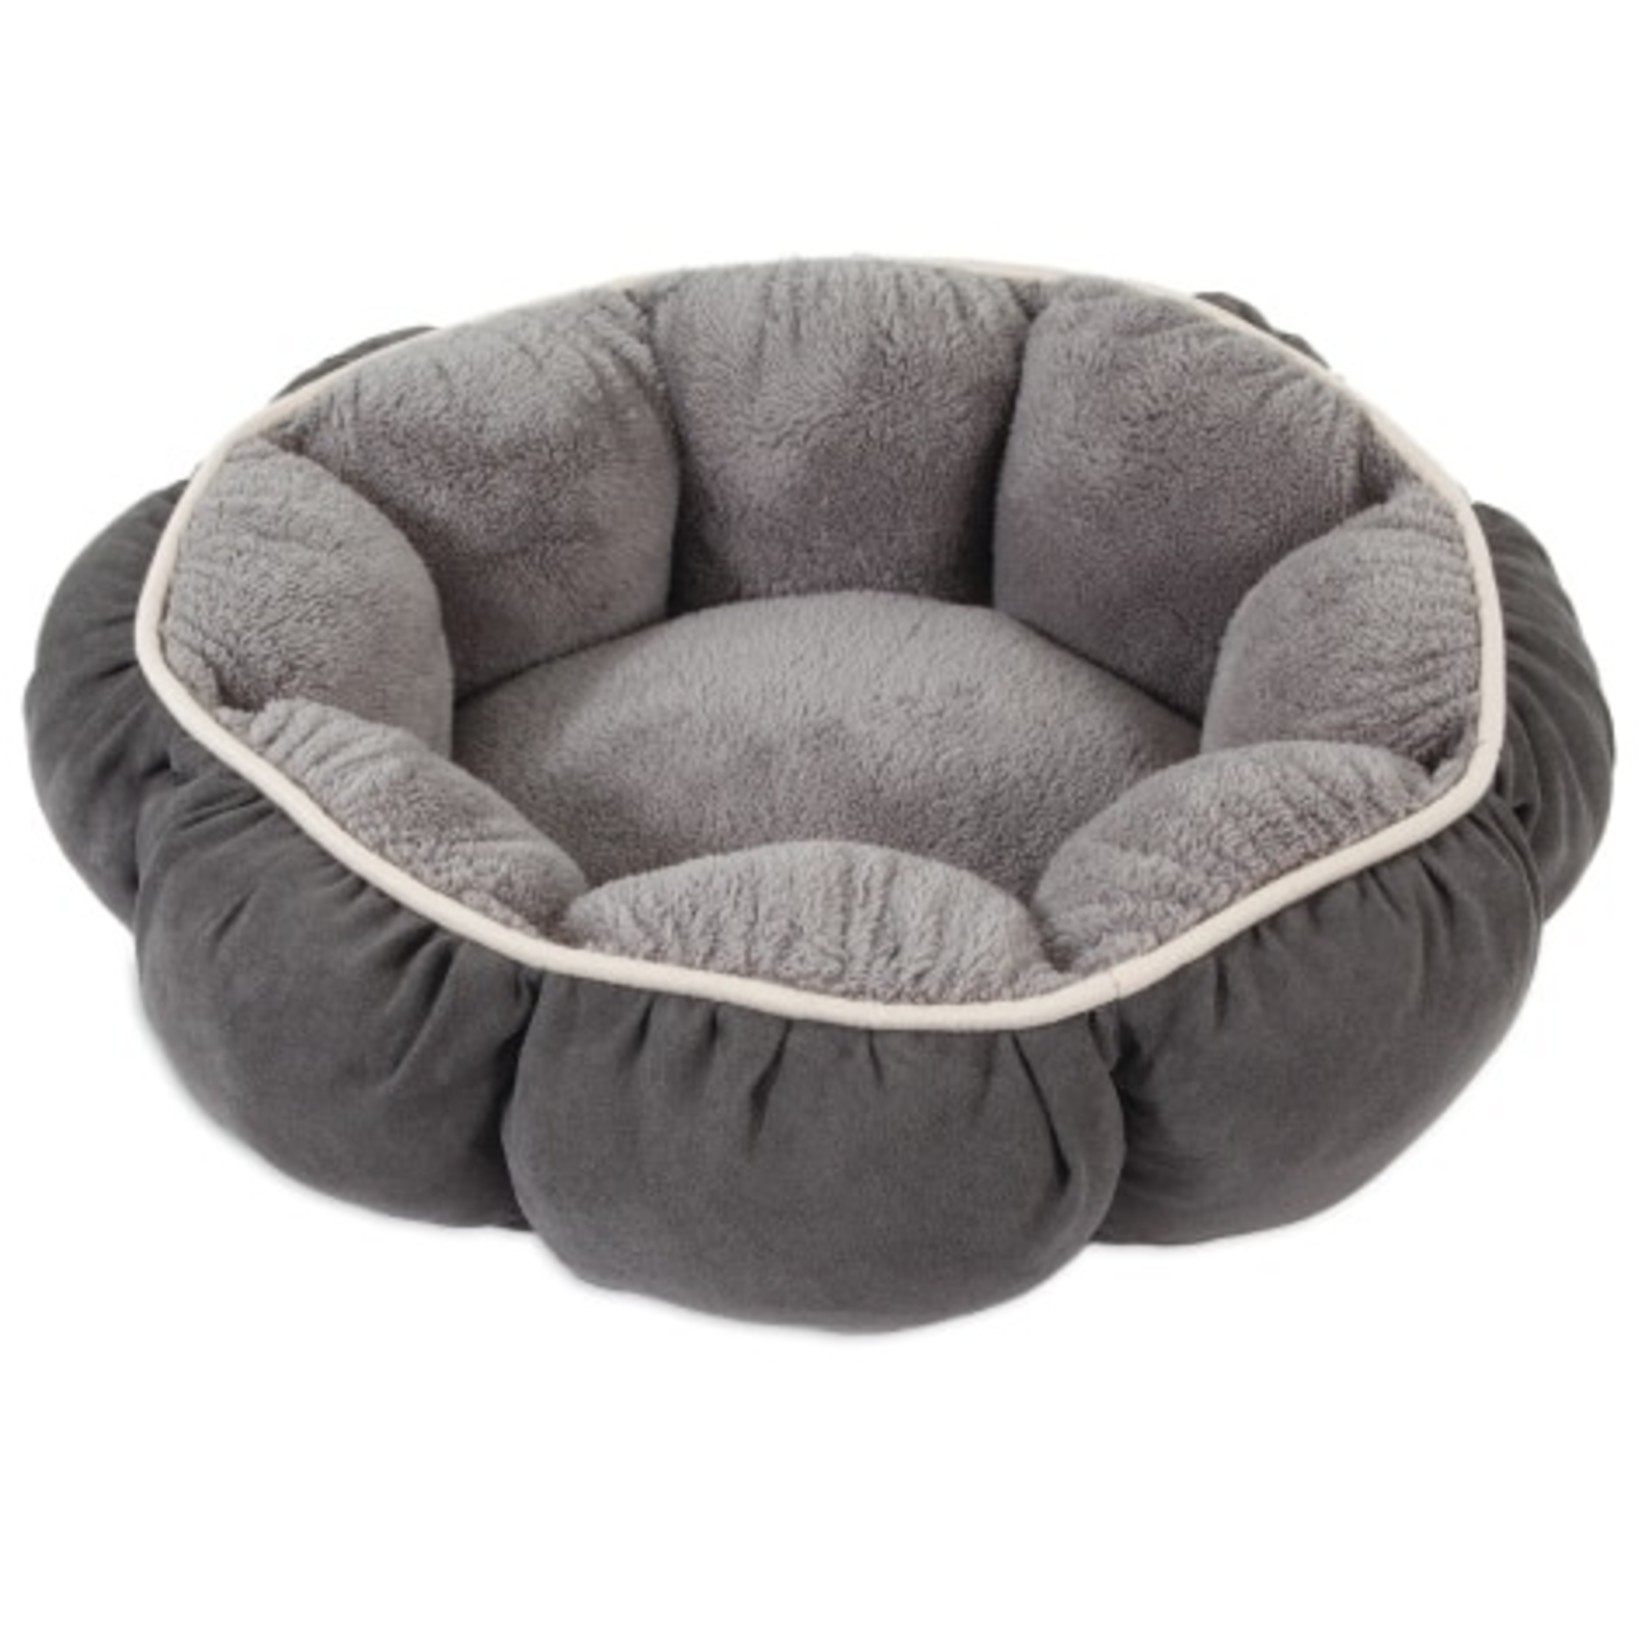 Petmate Petmate Aspen Pet Puffy Round Cat and Dog Bed 18in